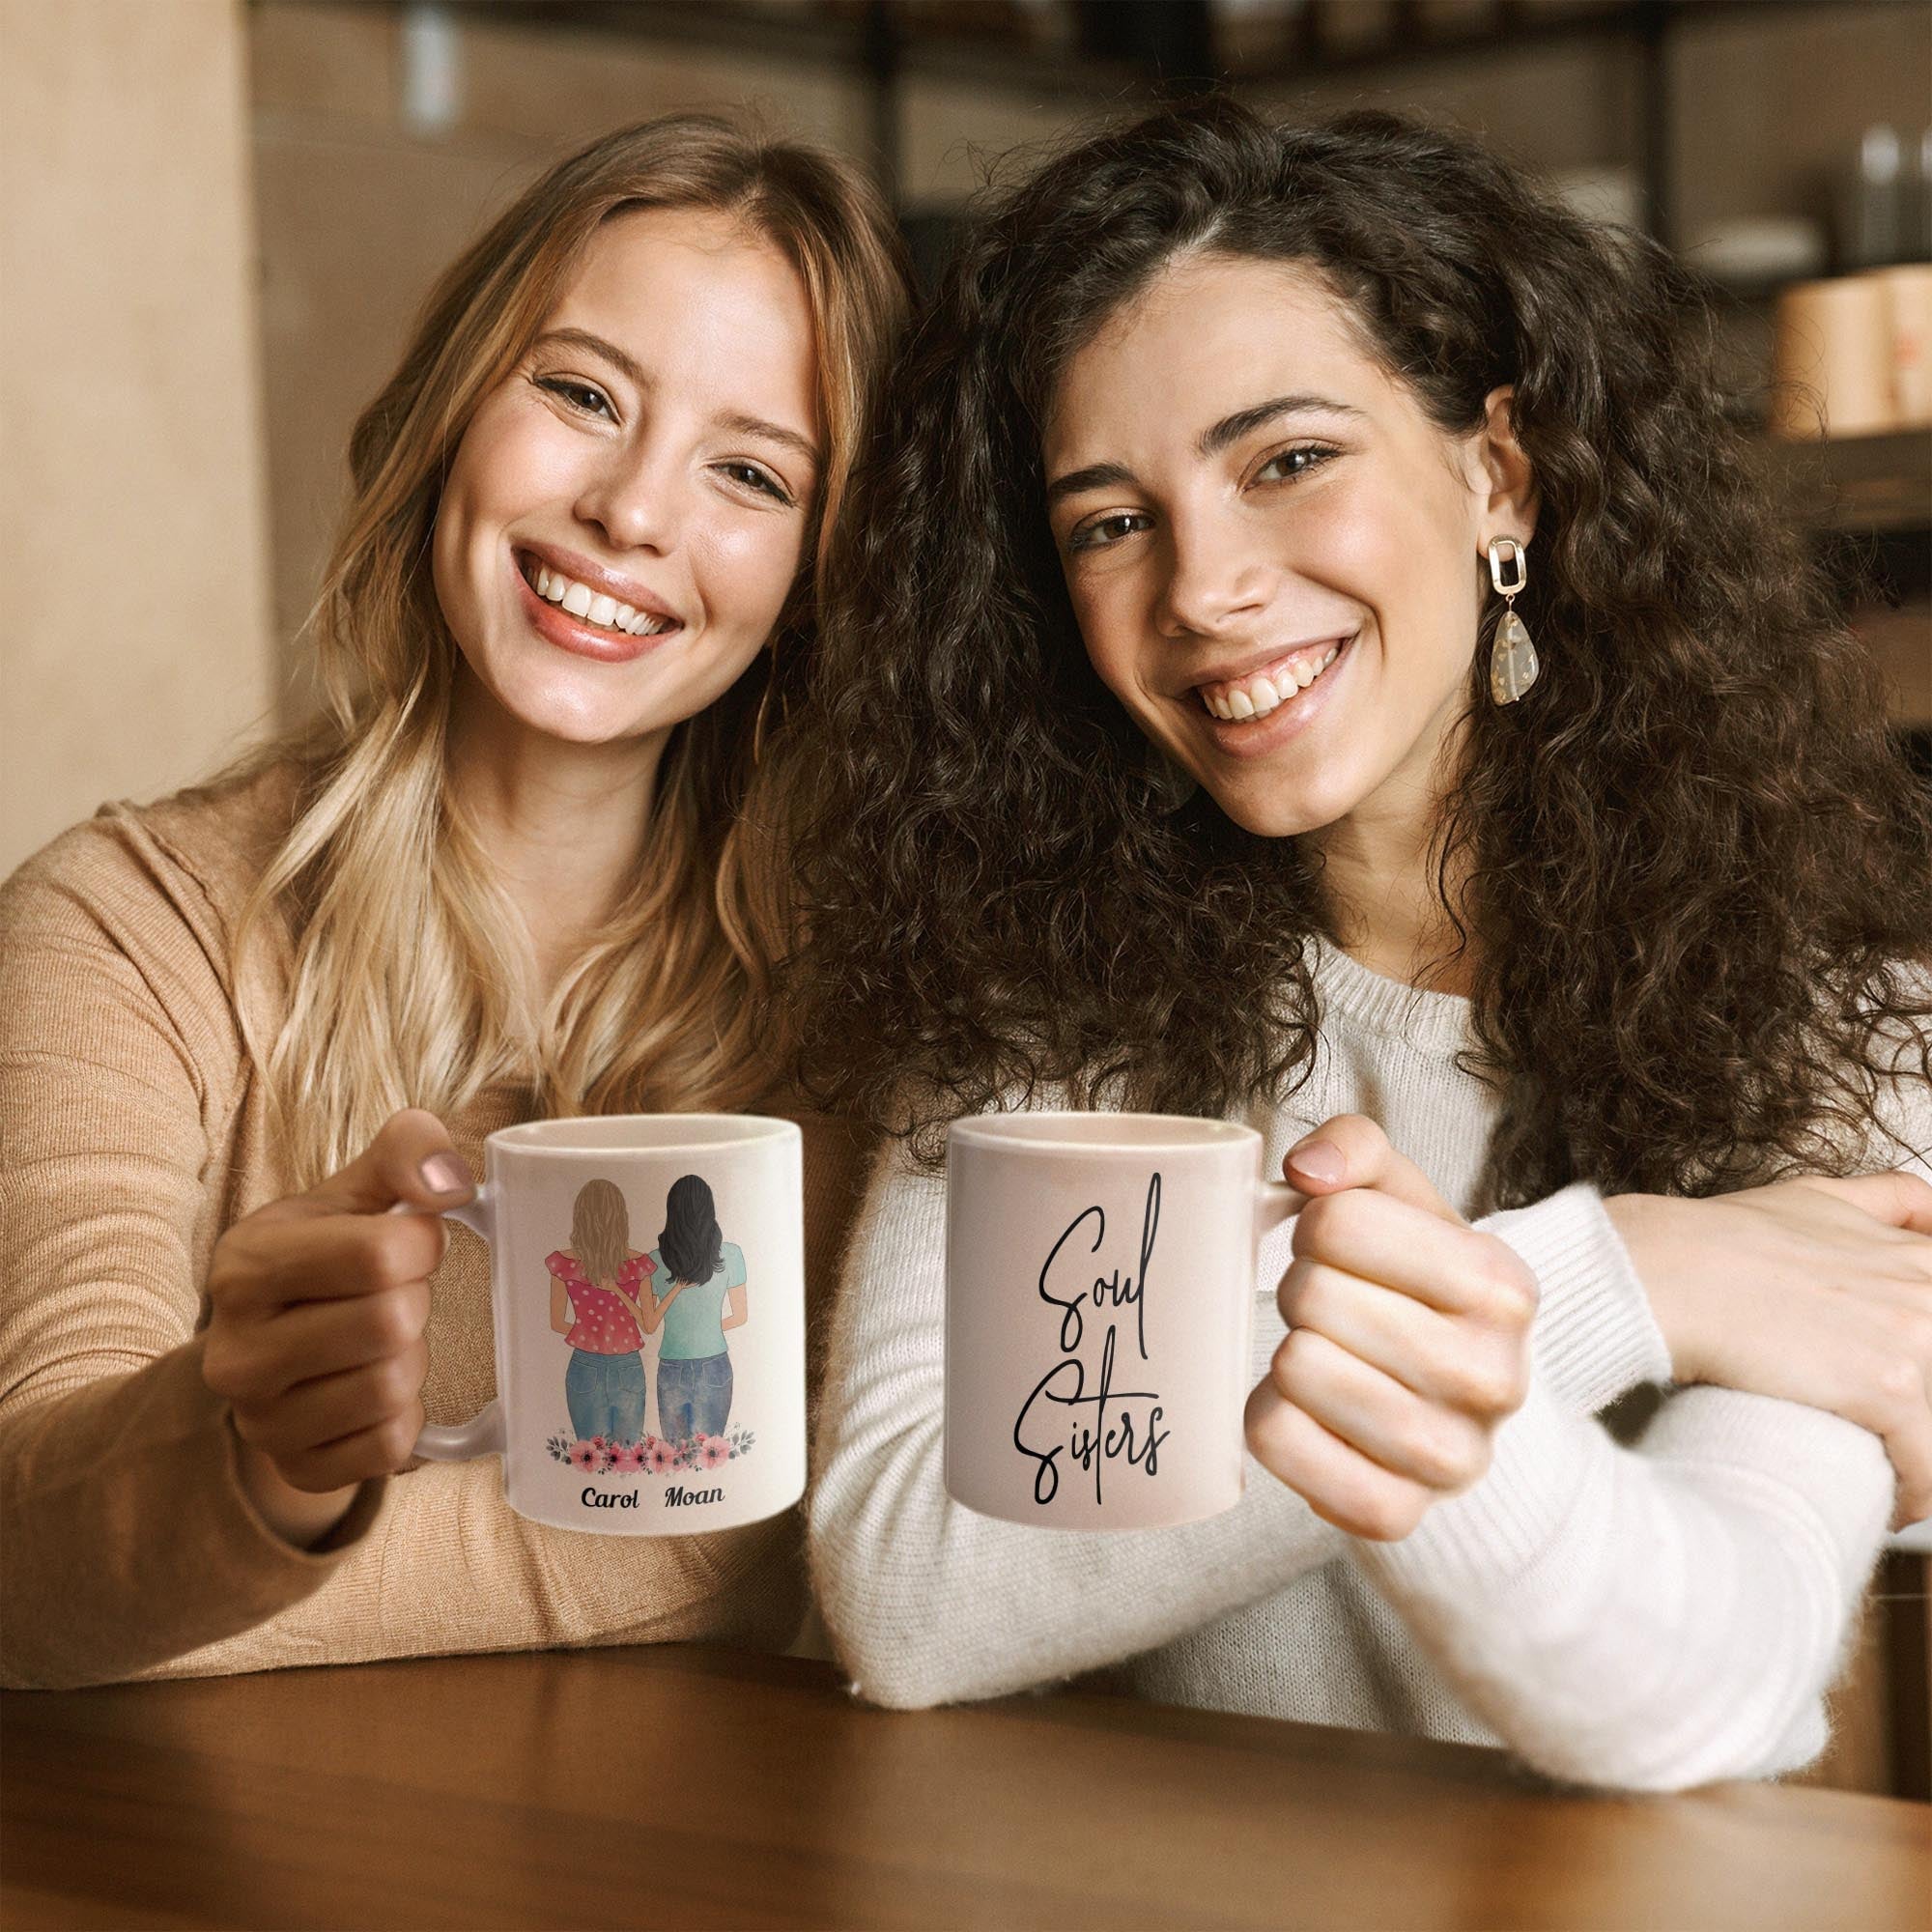 Soul Sisters Ver 2 - Personalized Mug - Birthday Gift For Friends, Soul Sisters, BFF, Besties - Girls Drawing